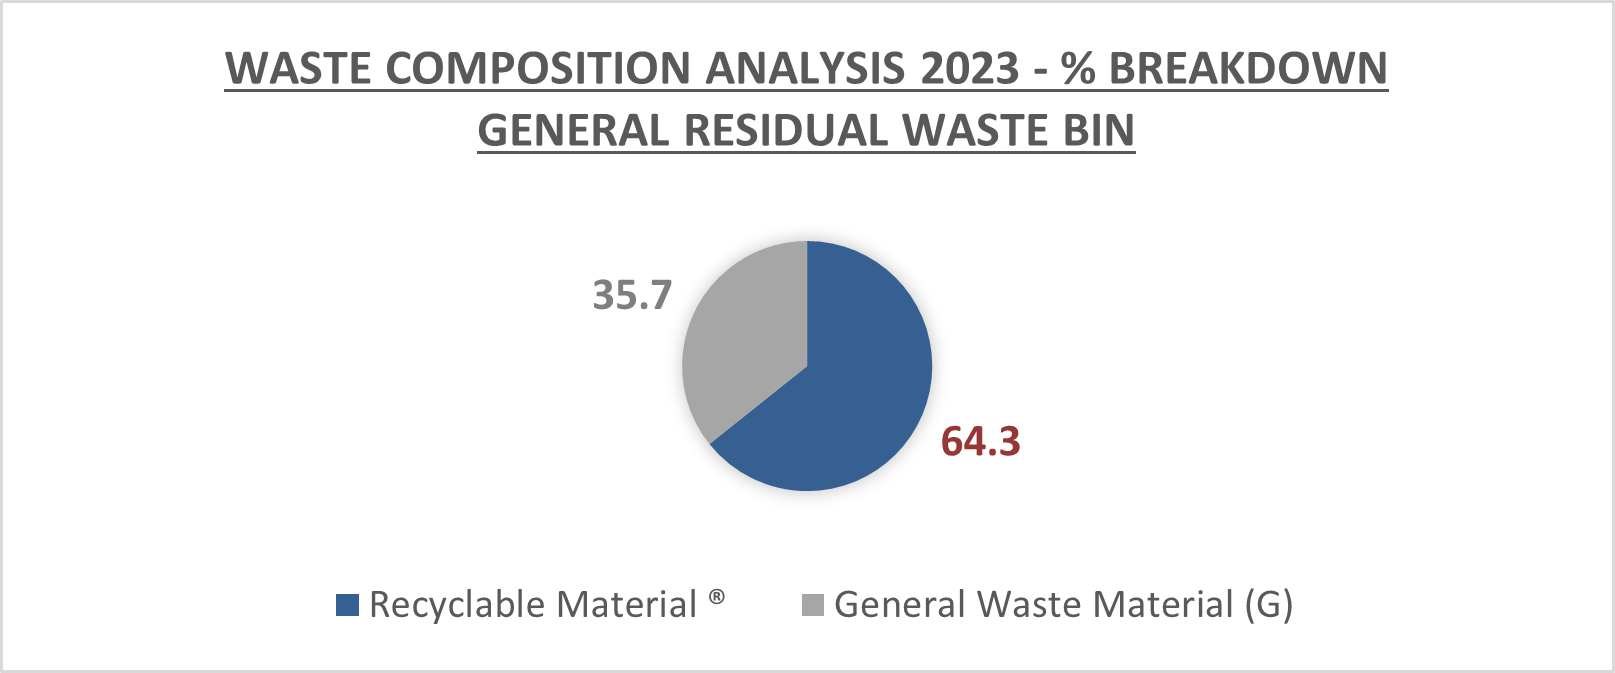 pie chart showing waste composition analysis 2023 breakdown - 64.3 recyclable material, 35.7 general waste material  